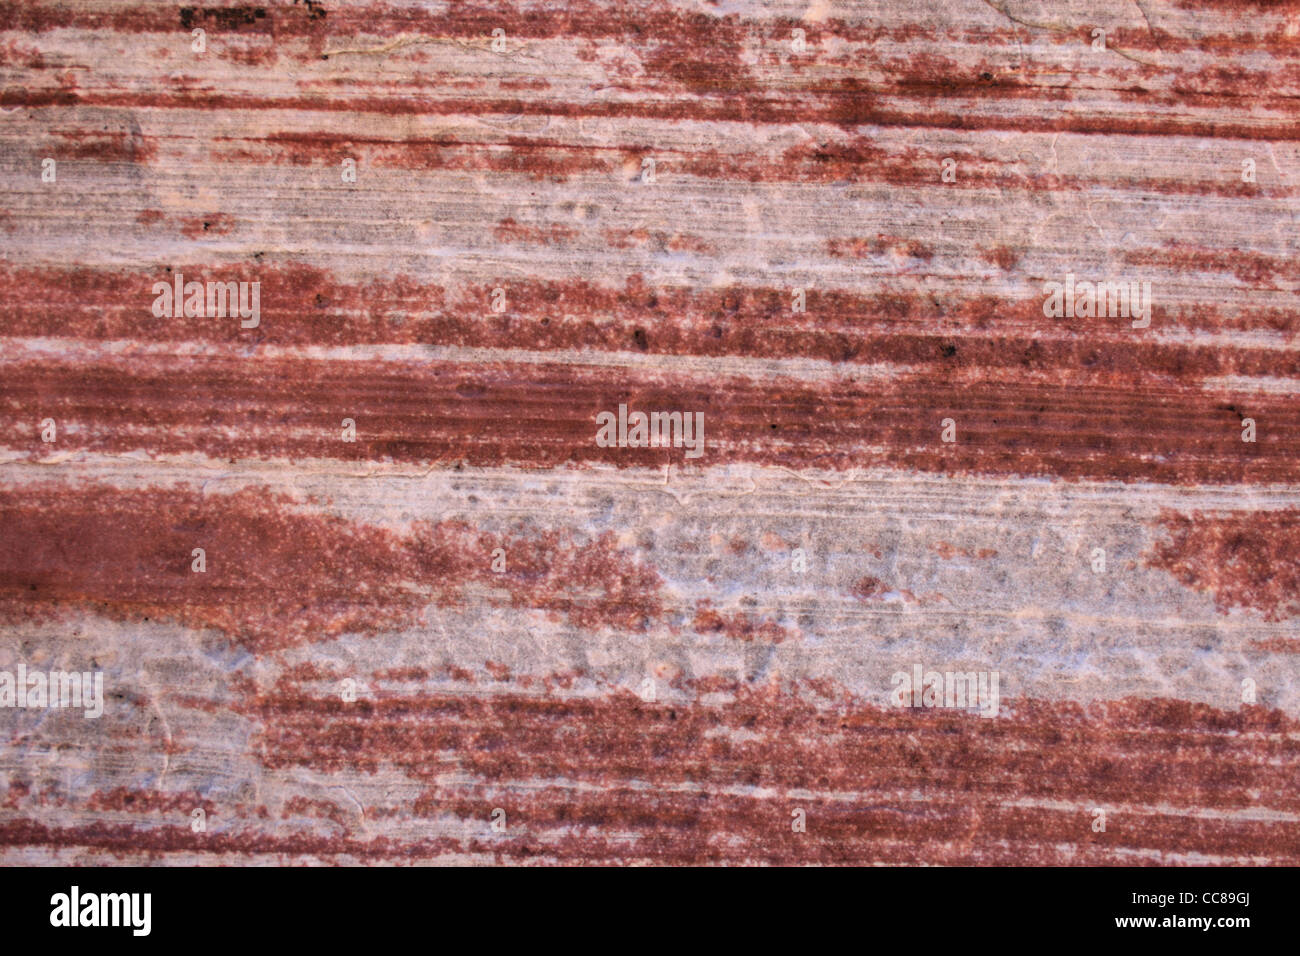 red and white horizontal sandstone layers Stock Photo